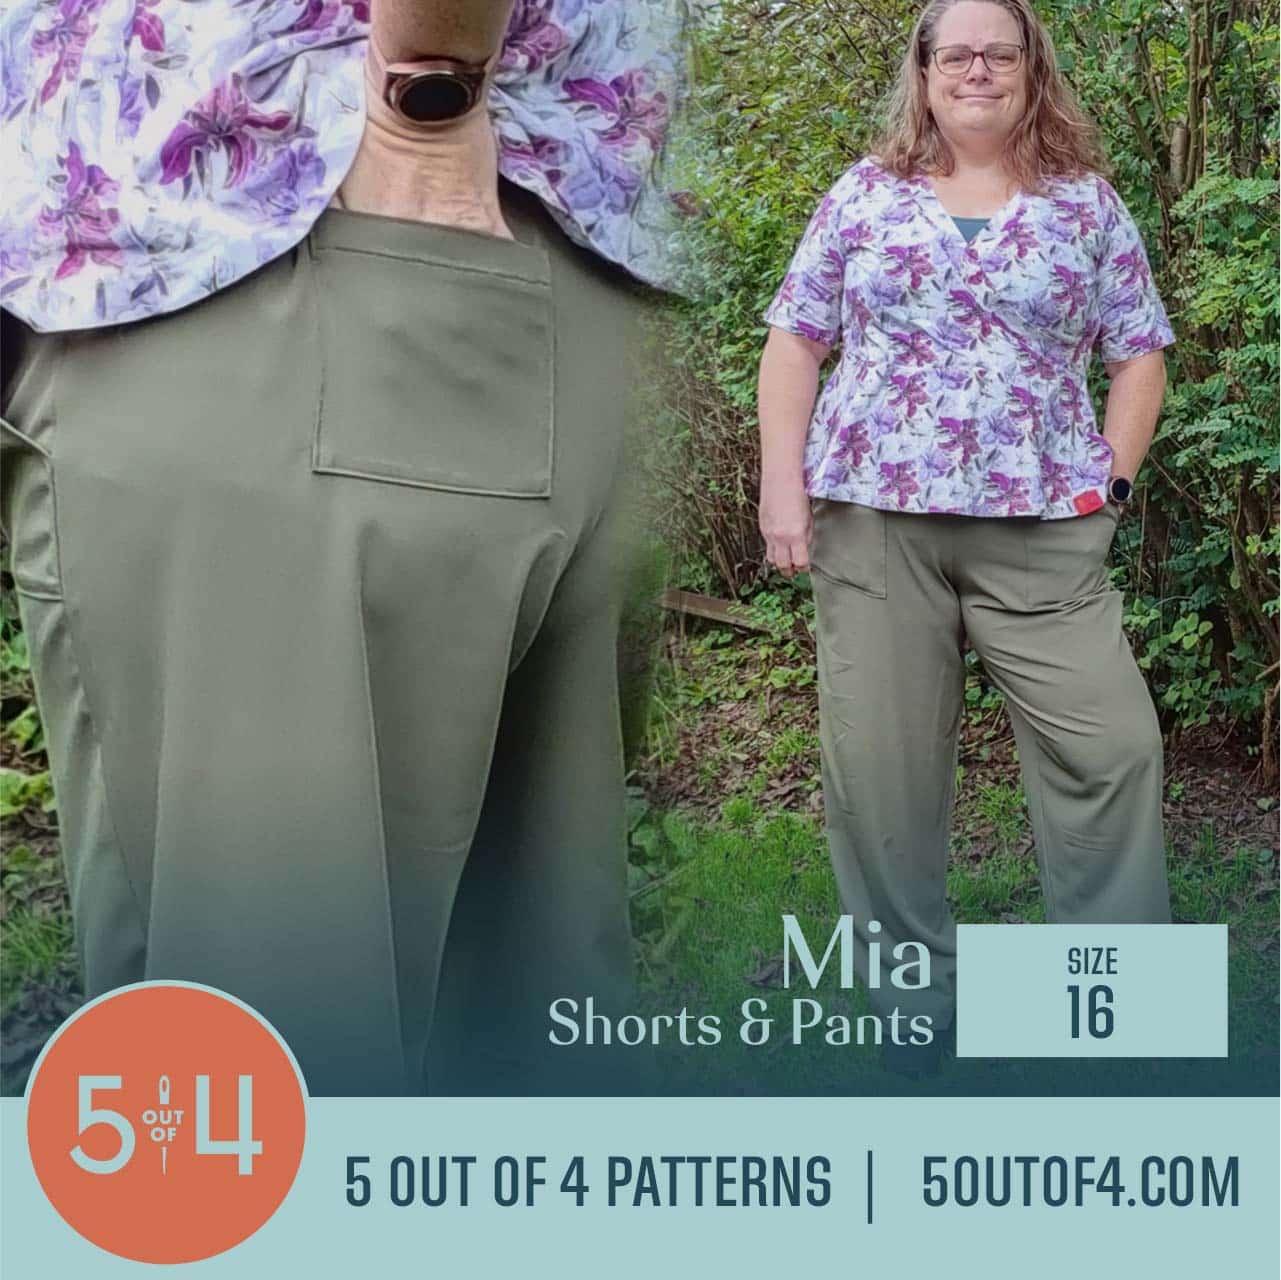 Mia Shorts and Pants - 5 out of 4 Patterns